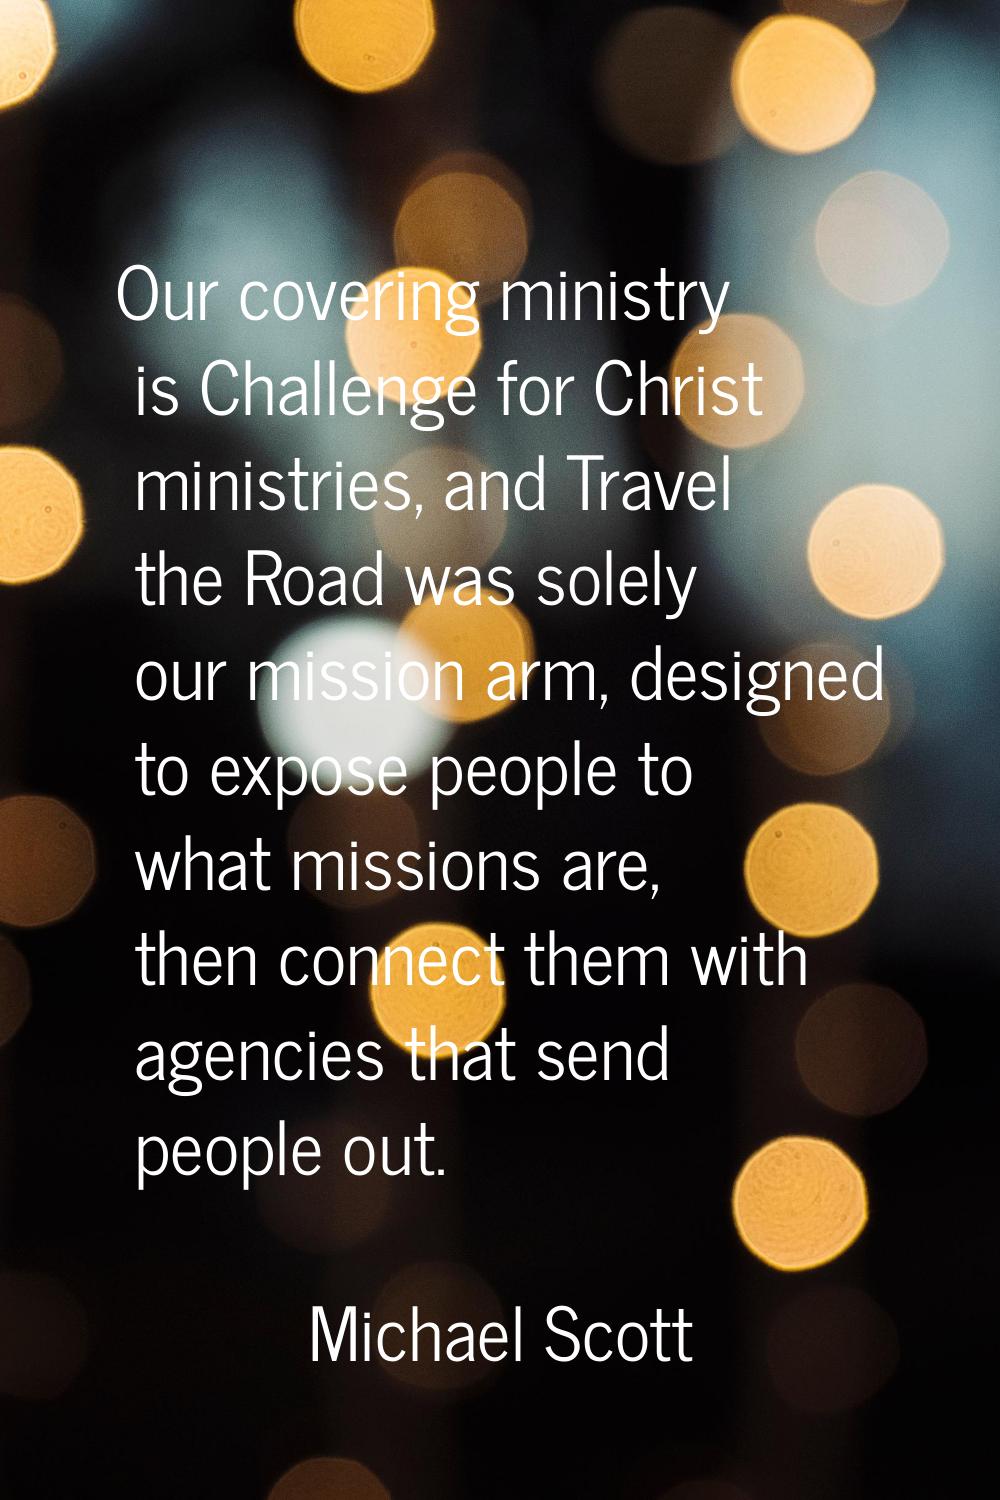 Our covering ministry is Challenge for Christ ministries, and Travel the Road was solely our missio